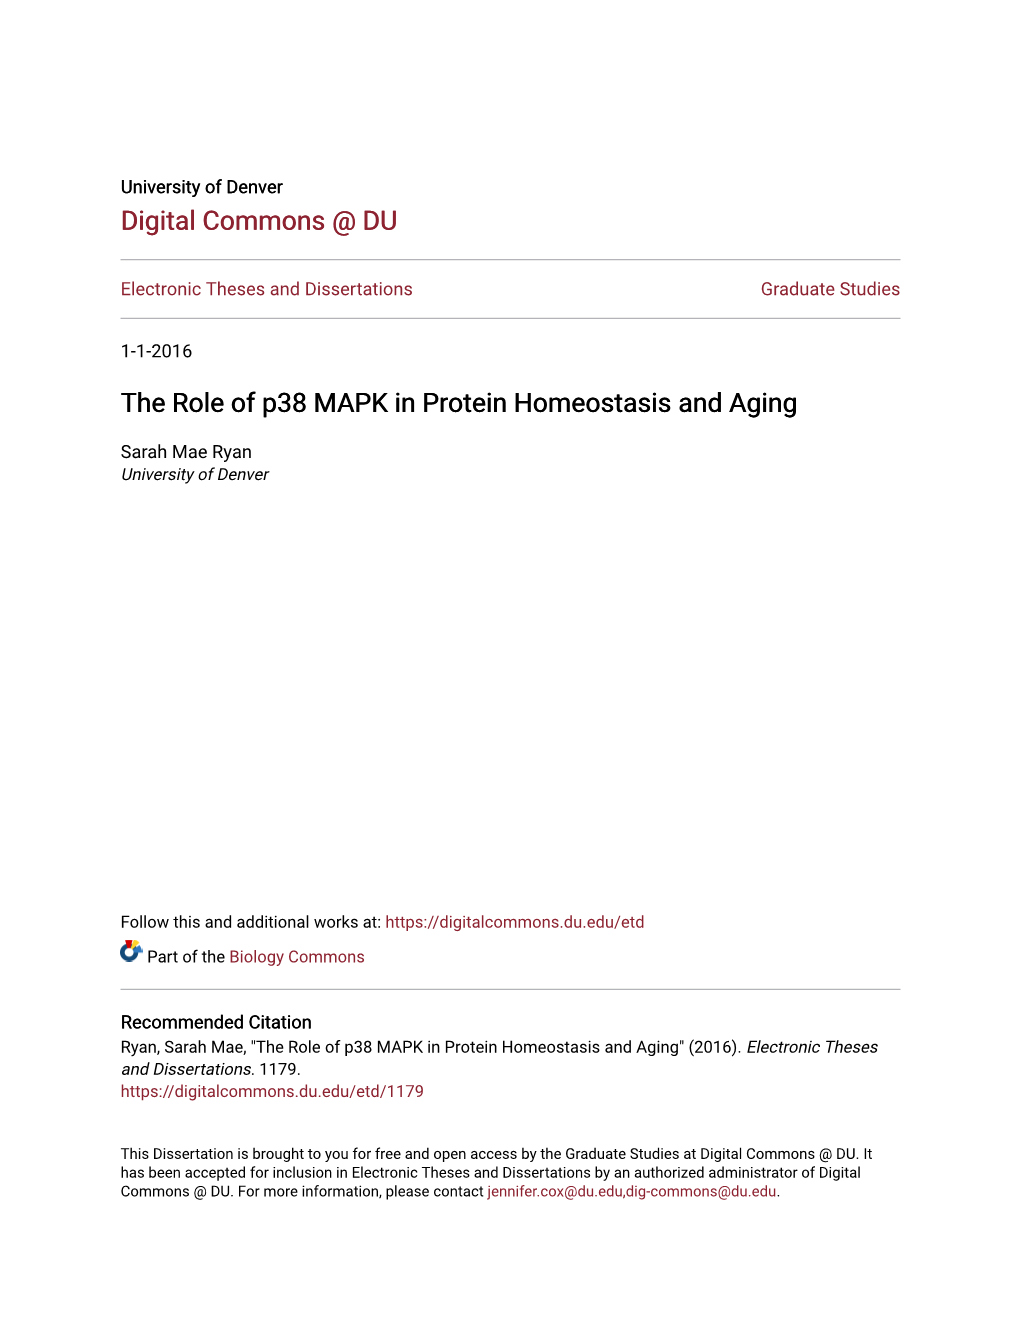 The Role of P38 MAPK in Protein Homeostasis and Aging